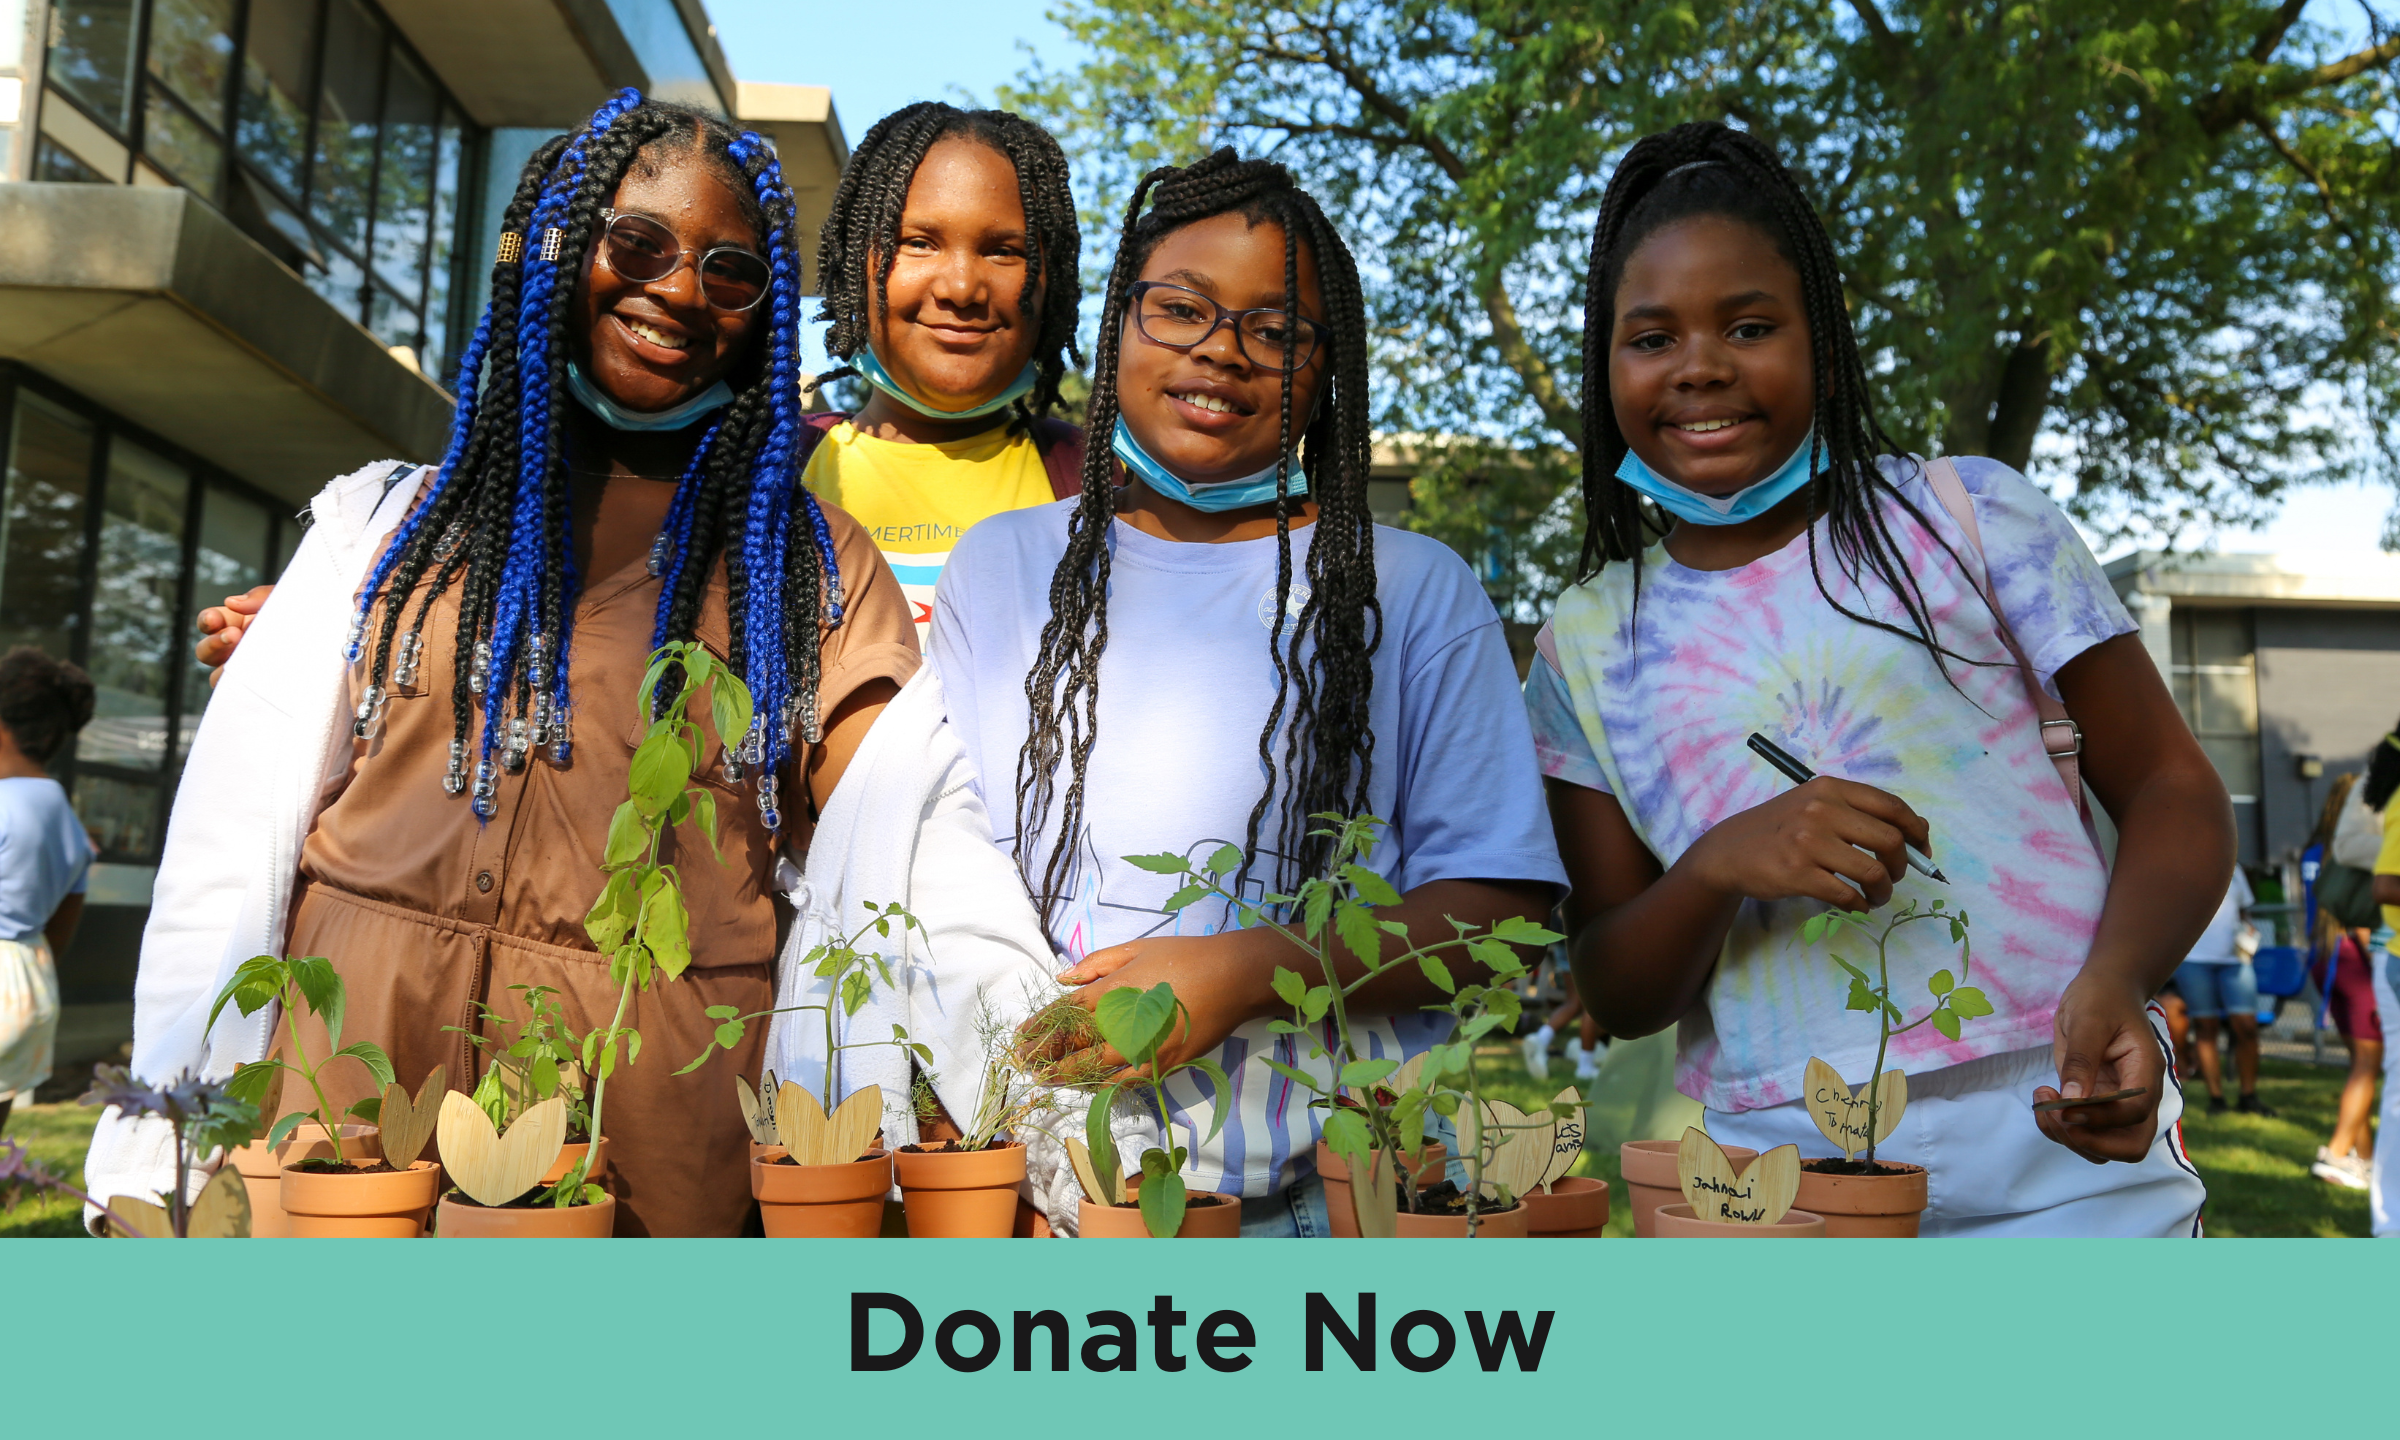 Four young people with medium-dark skin and various lengths of braided hair are standing together outside and smiling at the camera. They’re standing in front of a variety of small potted plants. At the bottom of the image are the words “Donate now”. 